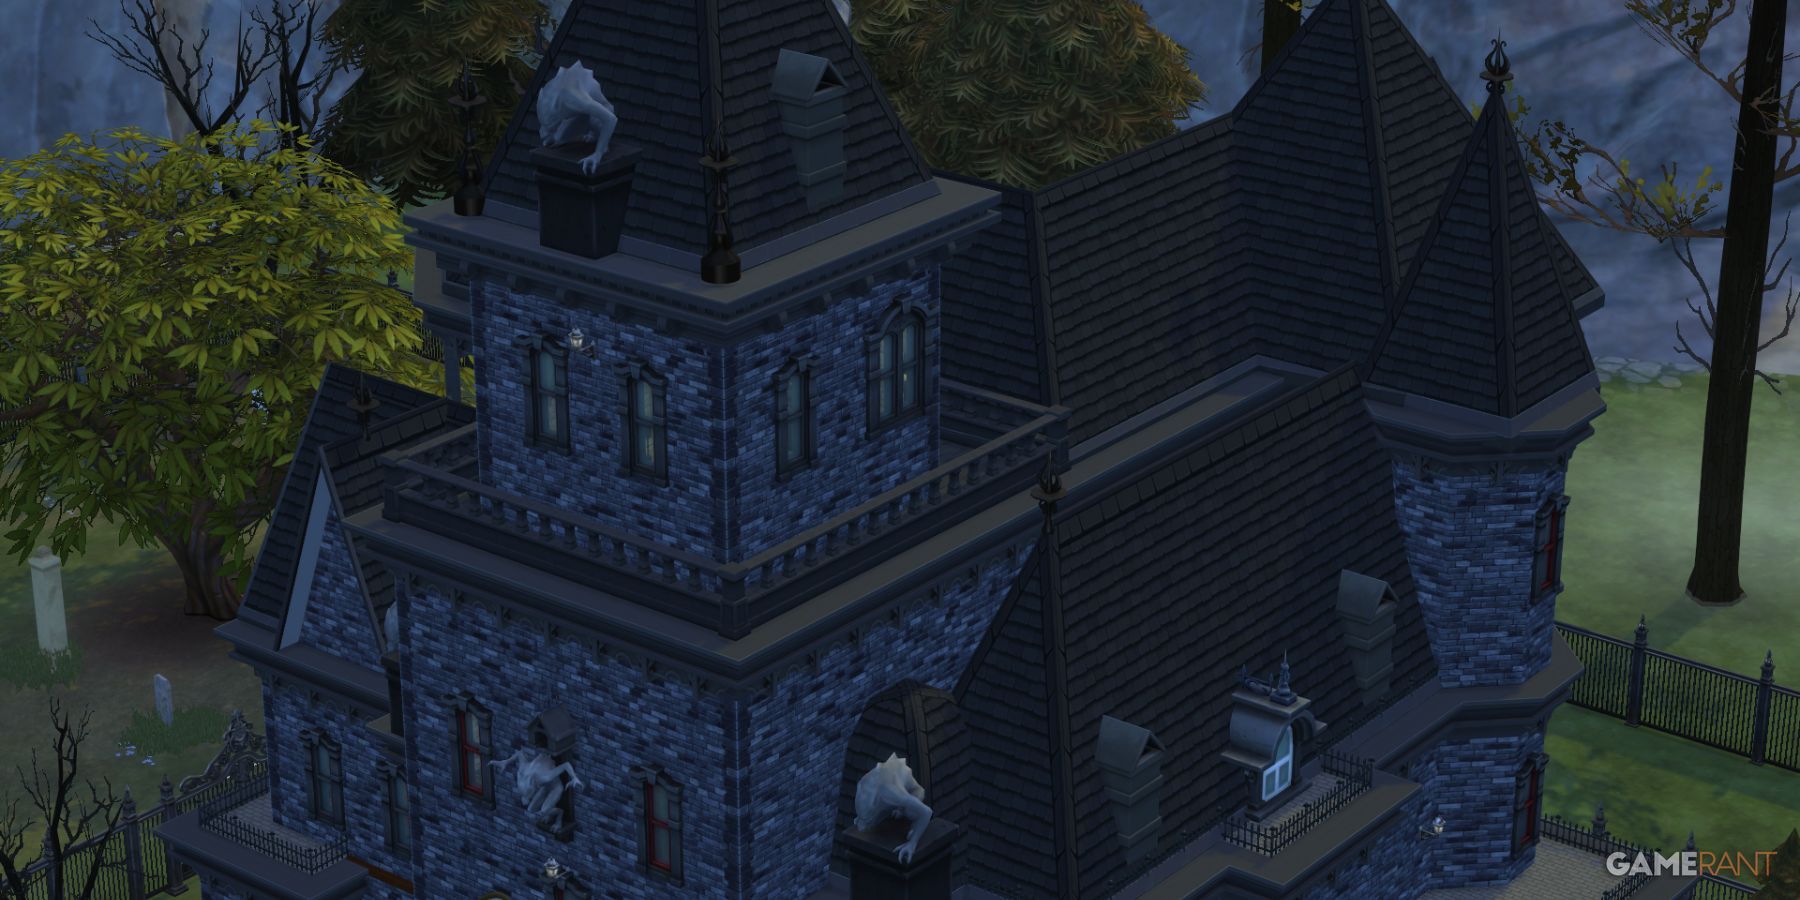 The Sims 4 Gothic Roof Details